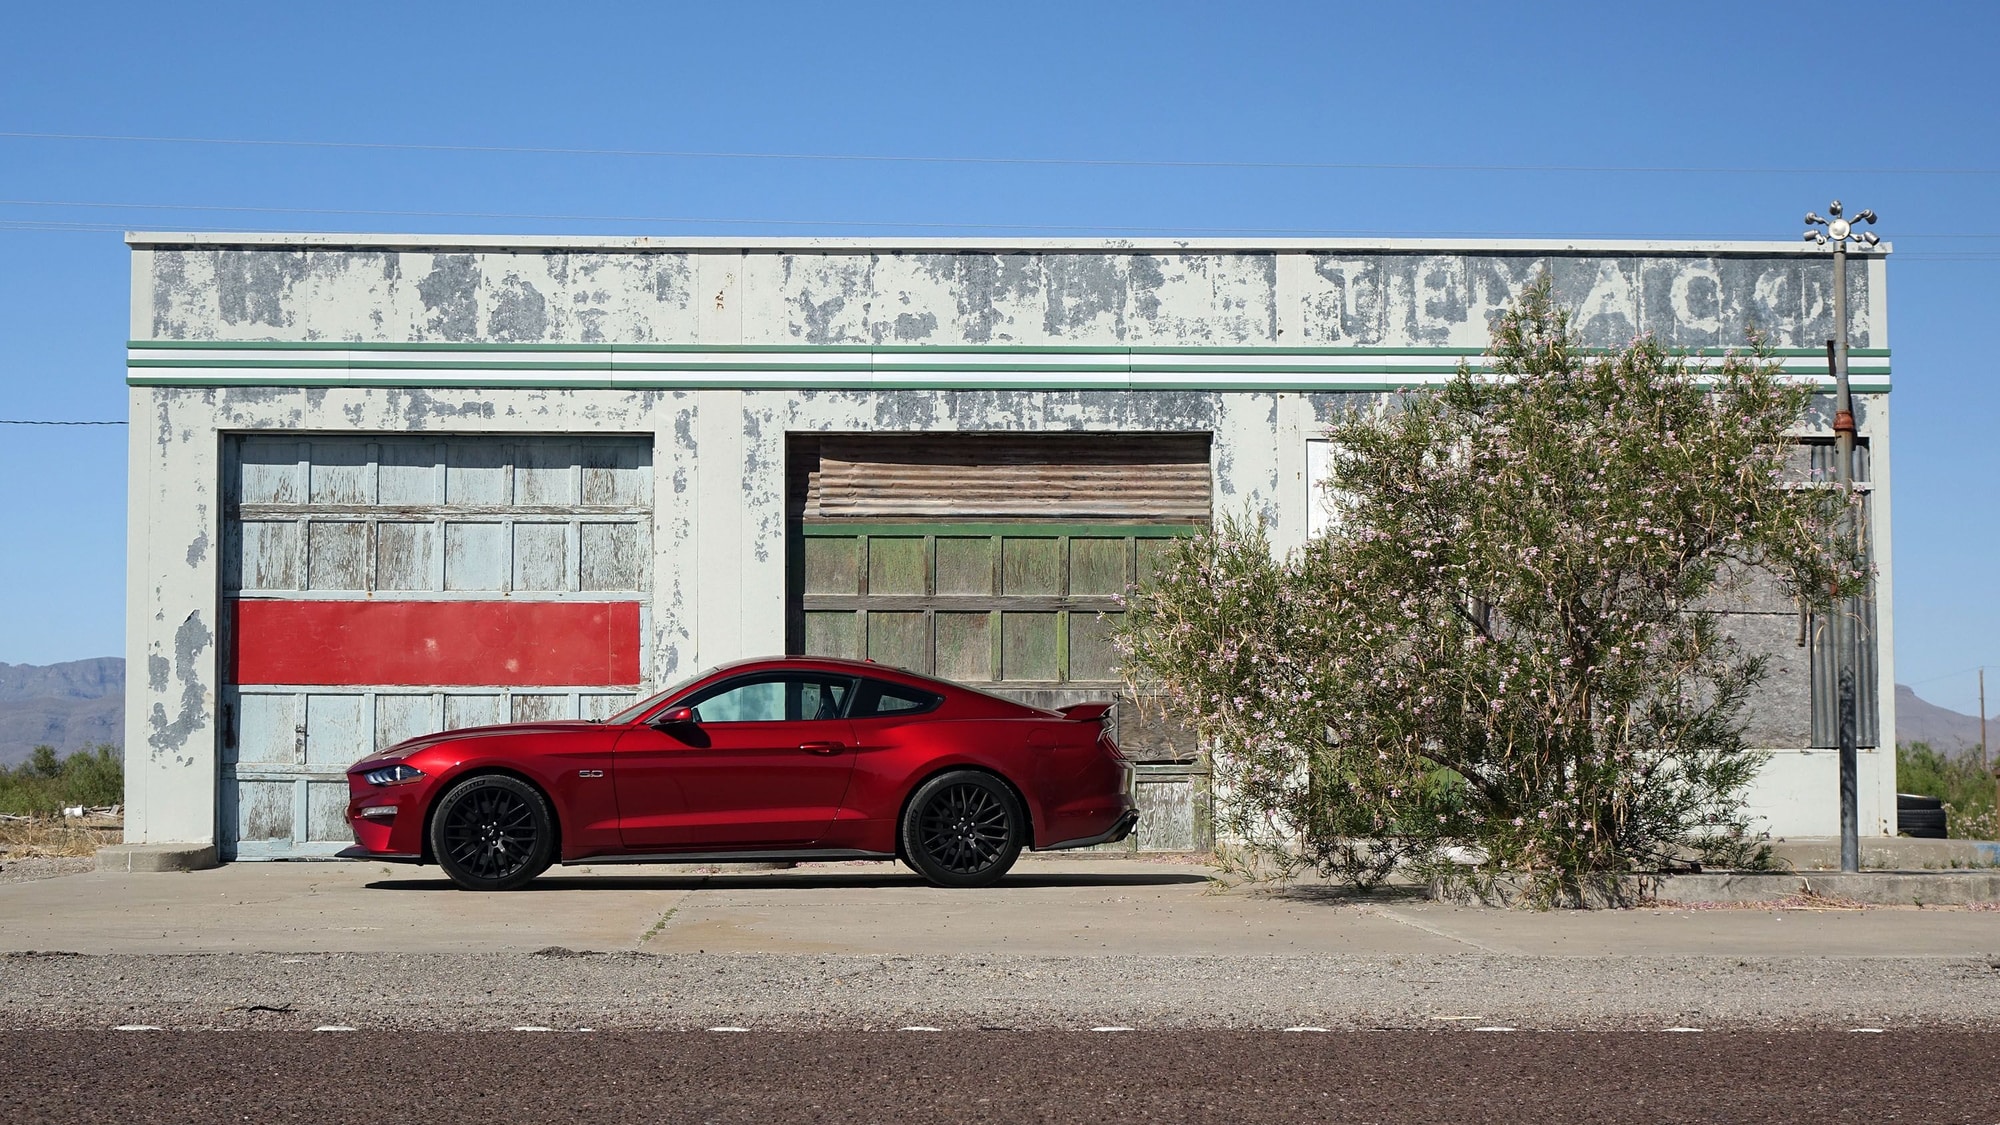 2018 Ford Mustang GT in Terlingua, Texas